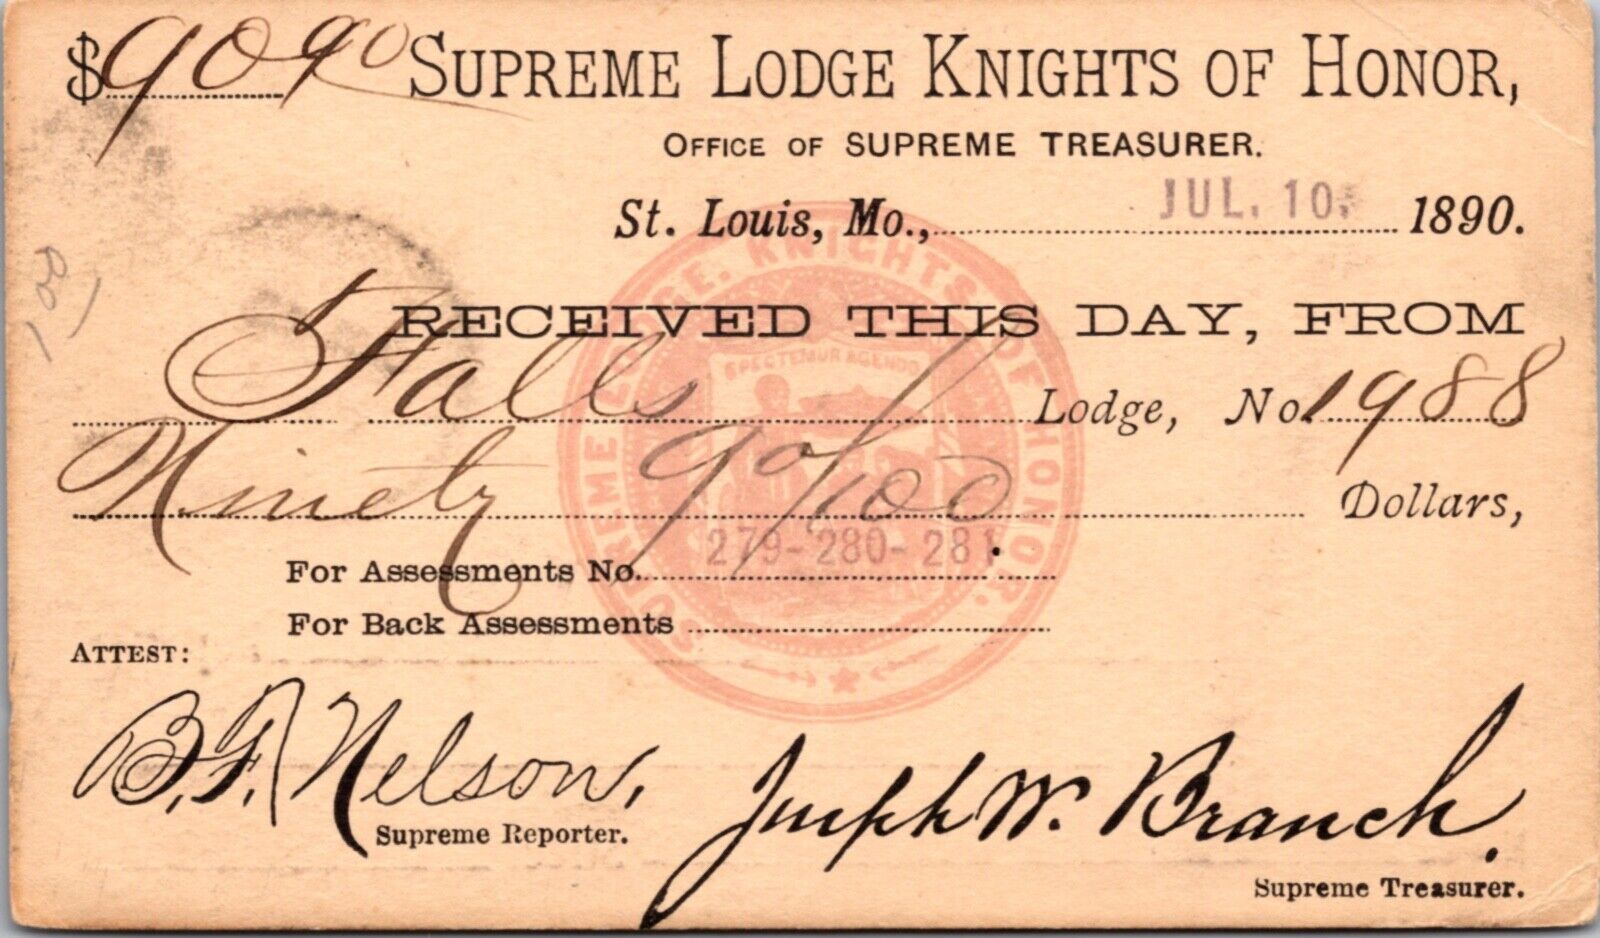 1890 Receipt Postcard Supreme Lodge Knights of Honor in St. Louis, Missouri